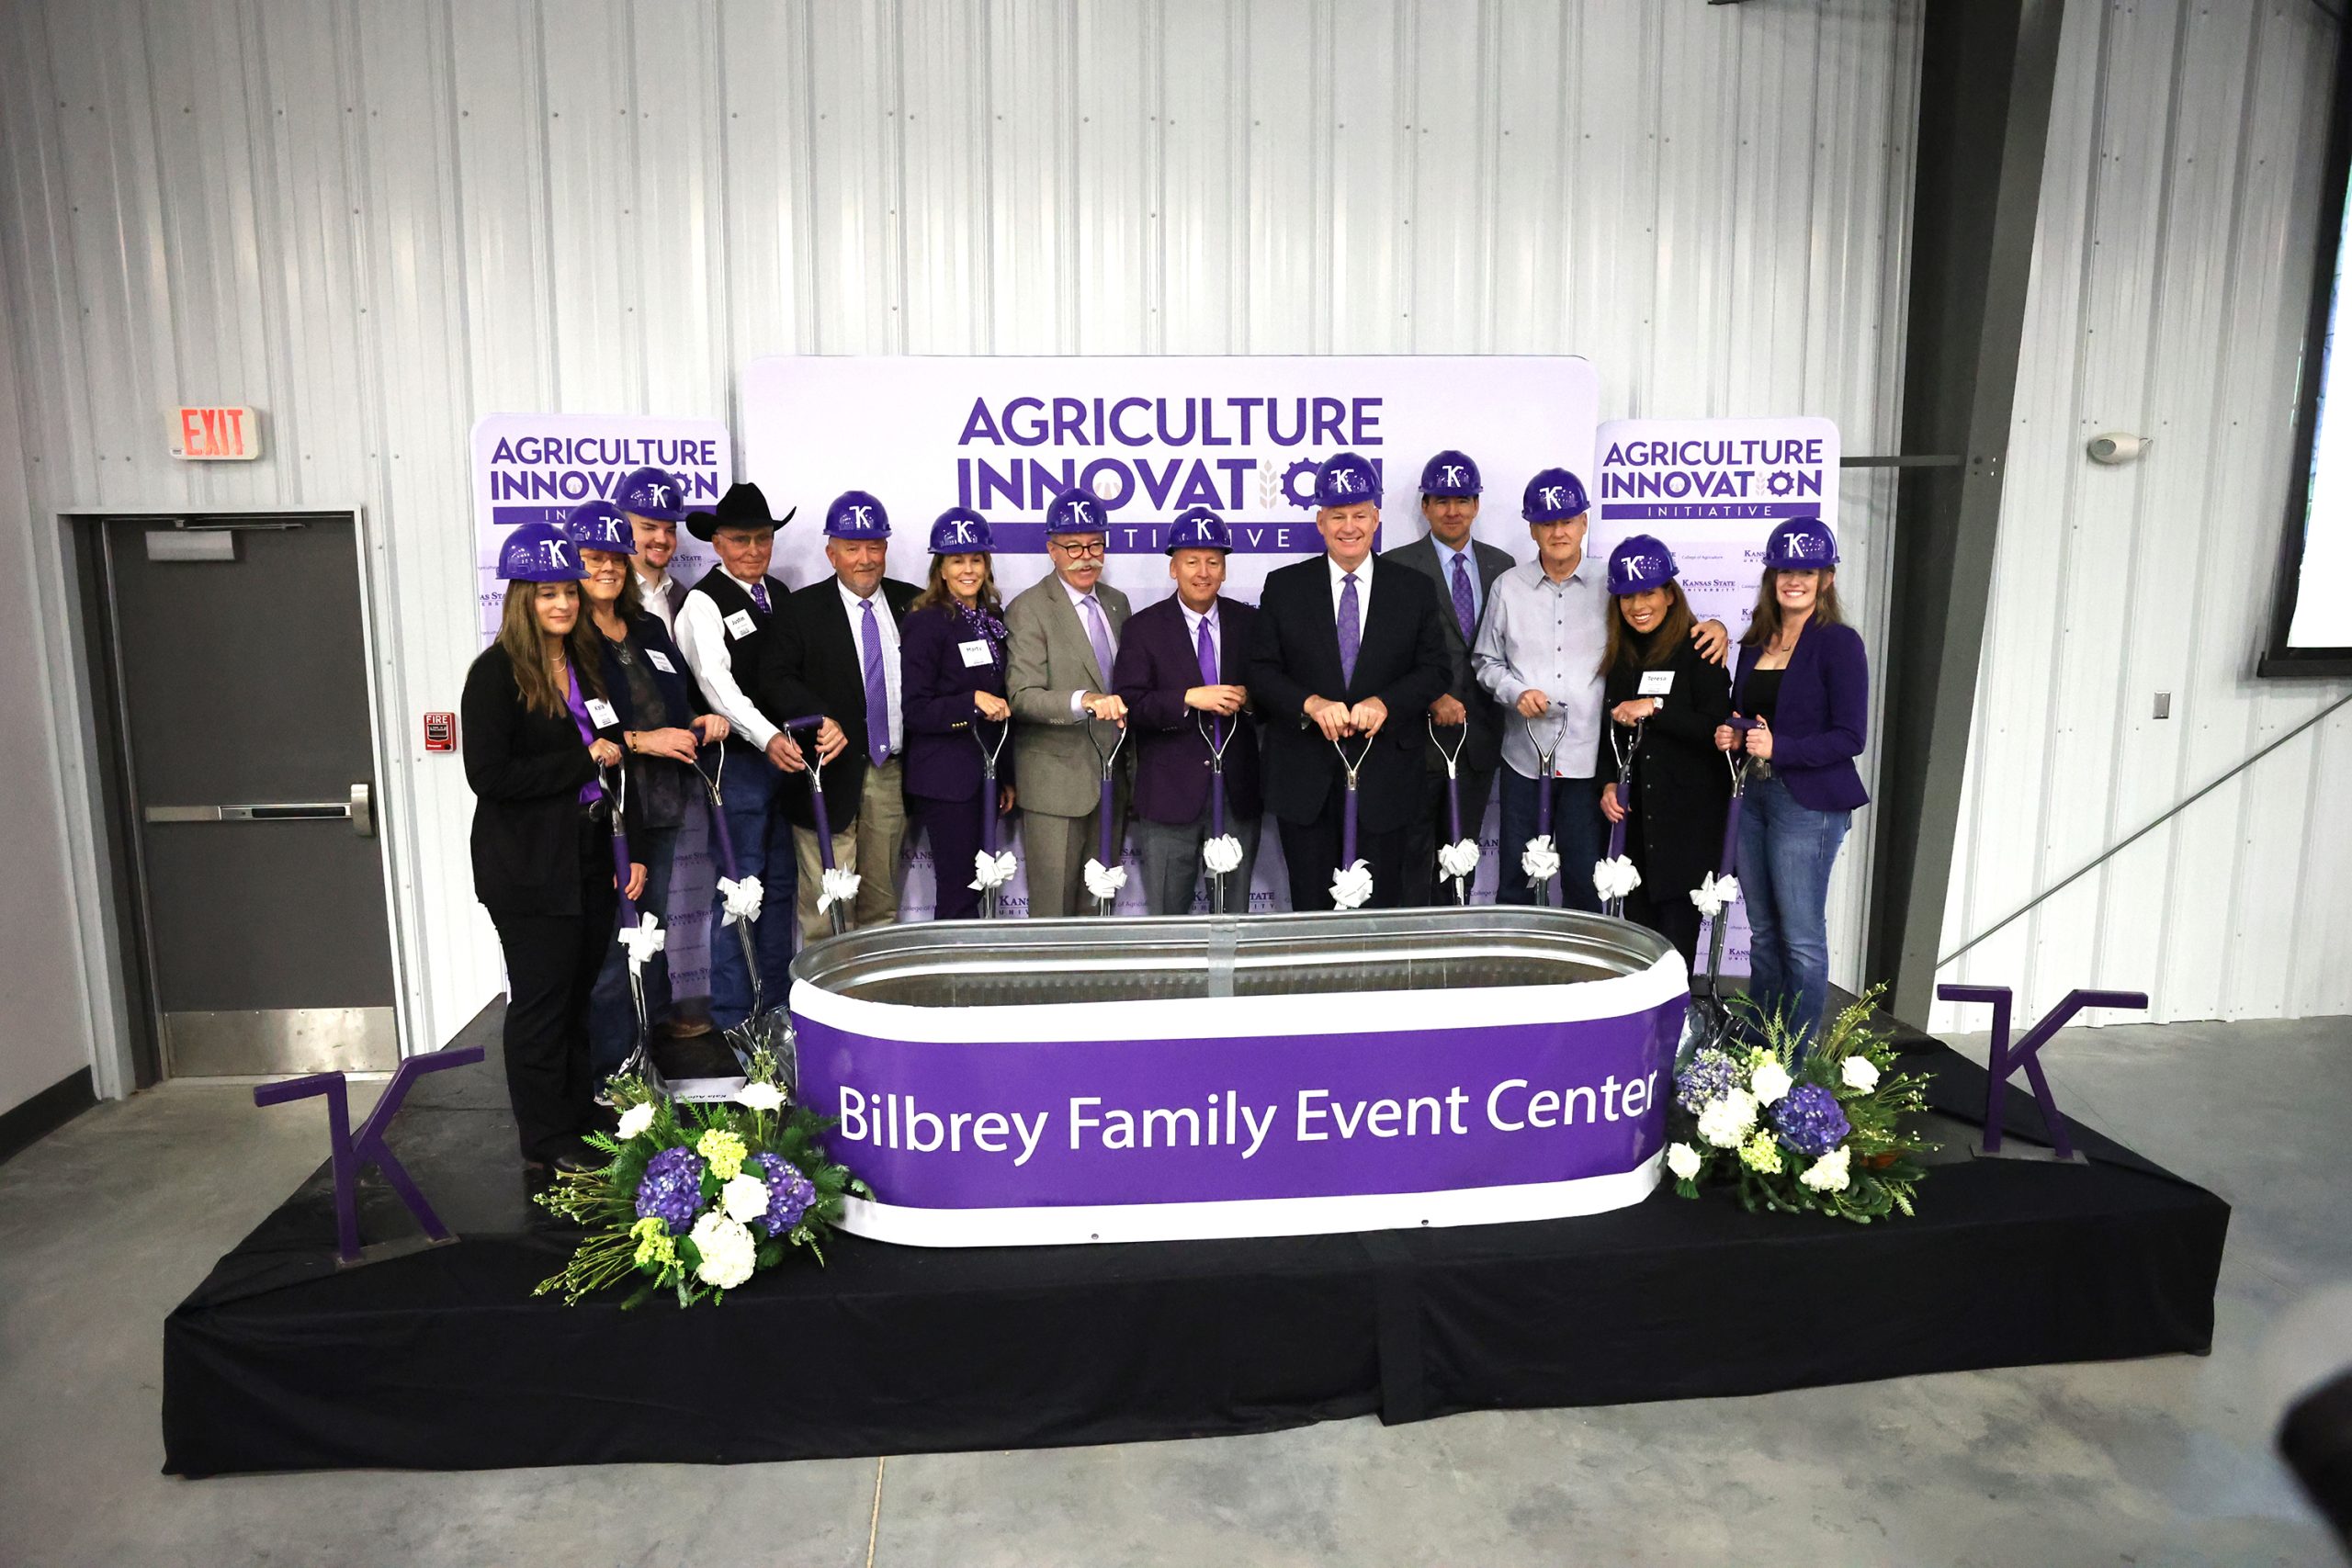 Dignitaries for the ceremonial groundbreaking include, pictured left to right are Kala Ade, representing GH2 Architects; Jeanne Mabery, representing the Marvin Robinson and Jack Goldstein charitable trusts; Kansas State University senior Brody Nemecek; Justin Janssen, K-State College of Veterinary Medicine; Mike Day, department head for K-State Animal Sciences and Industry; Marty Vanier, project donor; Ernie Minton, Eldon Gideon Dean of K-State's College of Agriculture; K-State President Richard Linton; Carl Ice, Kansas Board of Regents vice chair; Gregg Willems, K-State Foundation president and CEO; JP and Theresa Bilbrey, project donors; and K-State senior Kristen Kahler. (Photo by Bill Spiegel.)